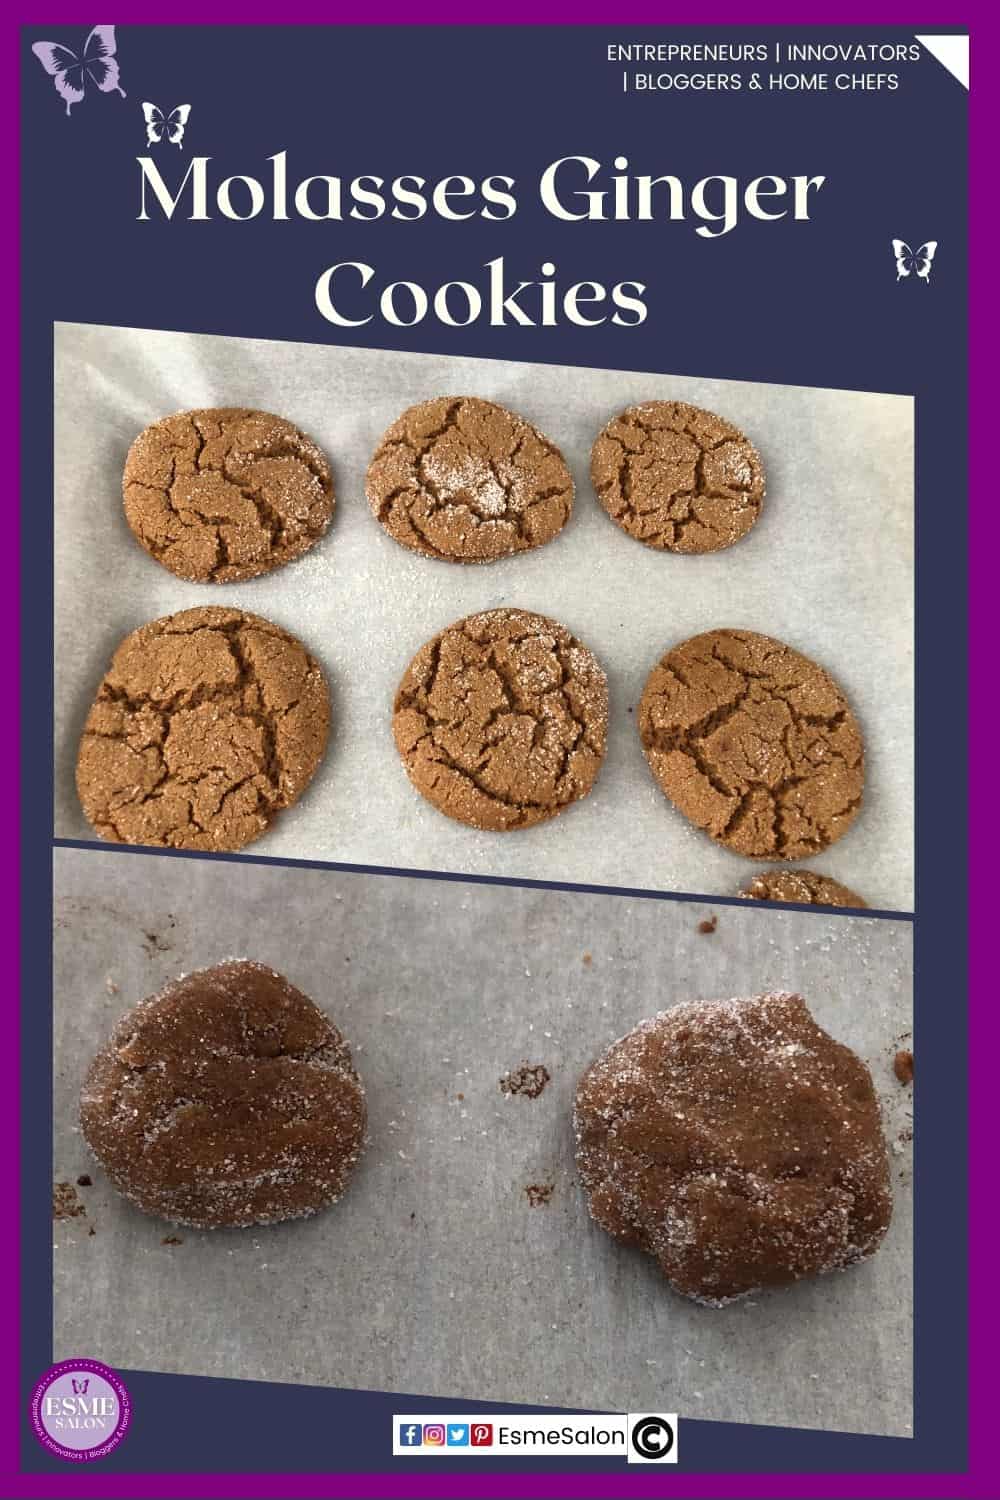 an image of Molasses Ginger Cookies baked and unbaked